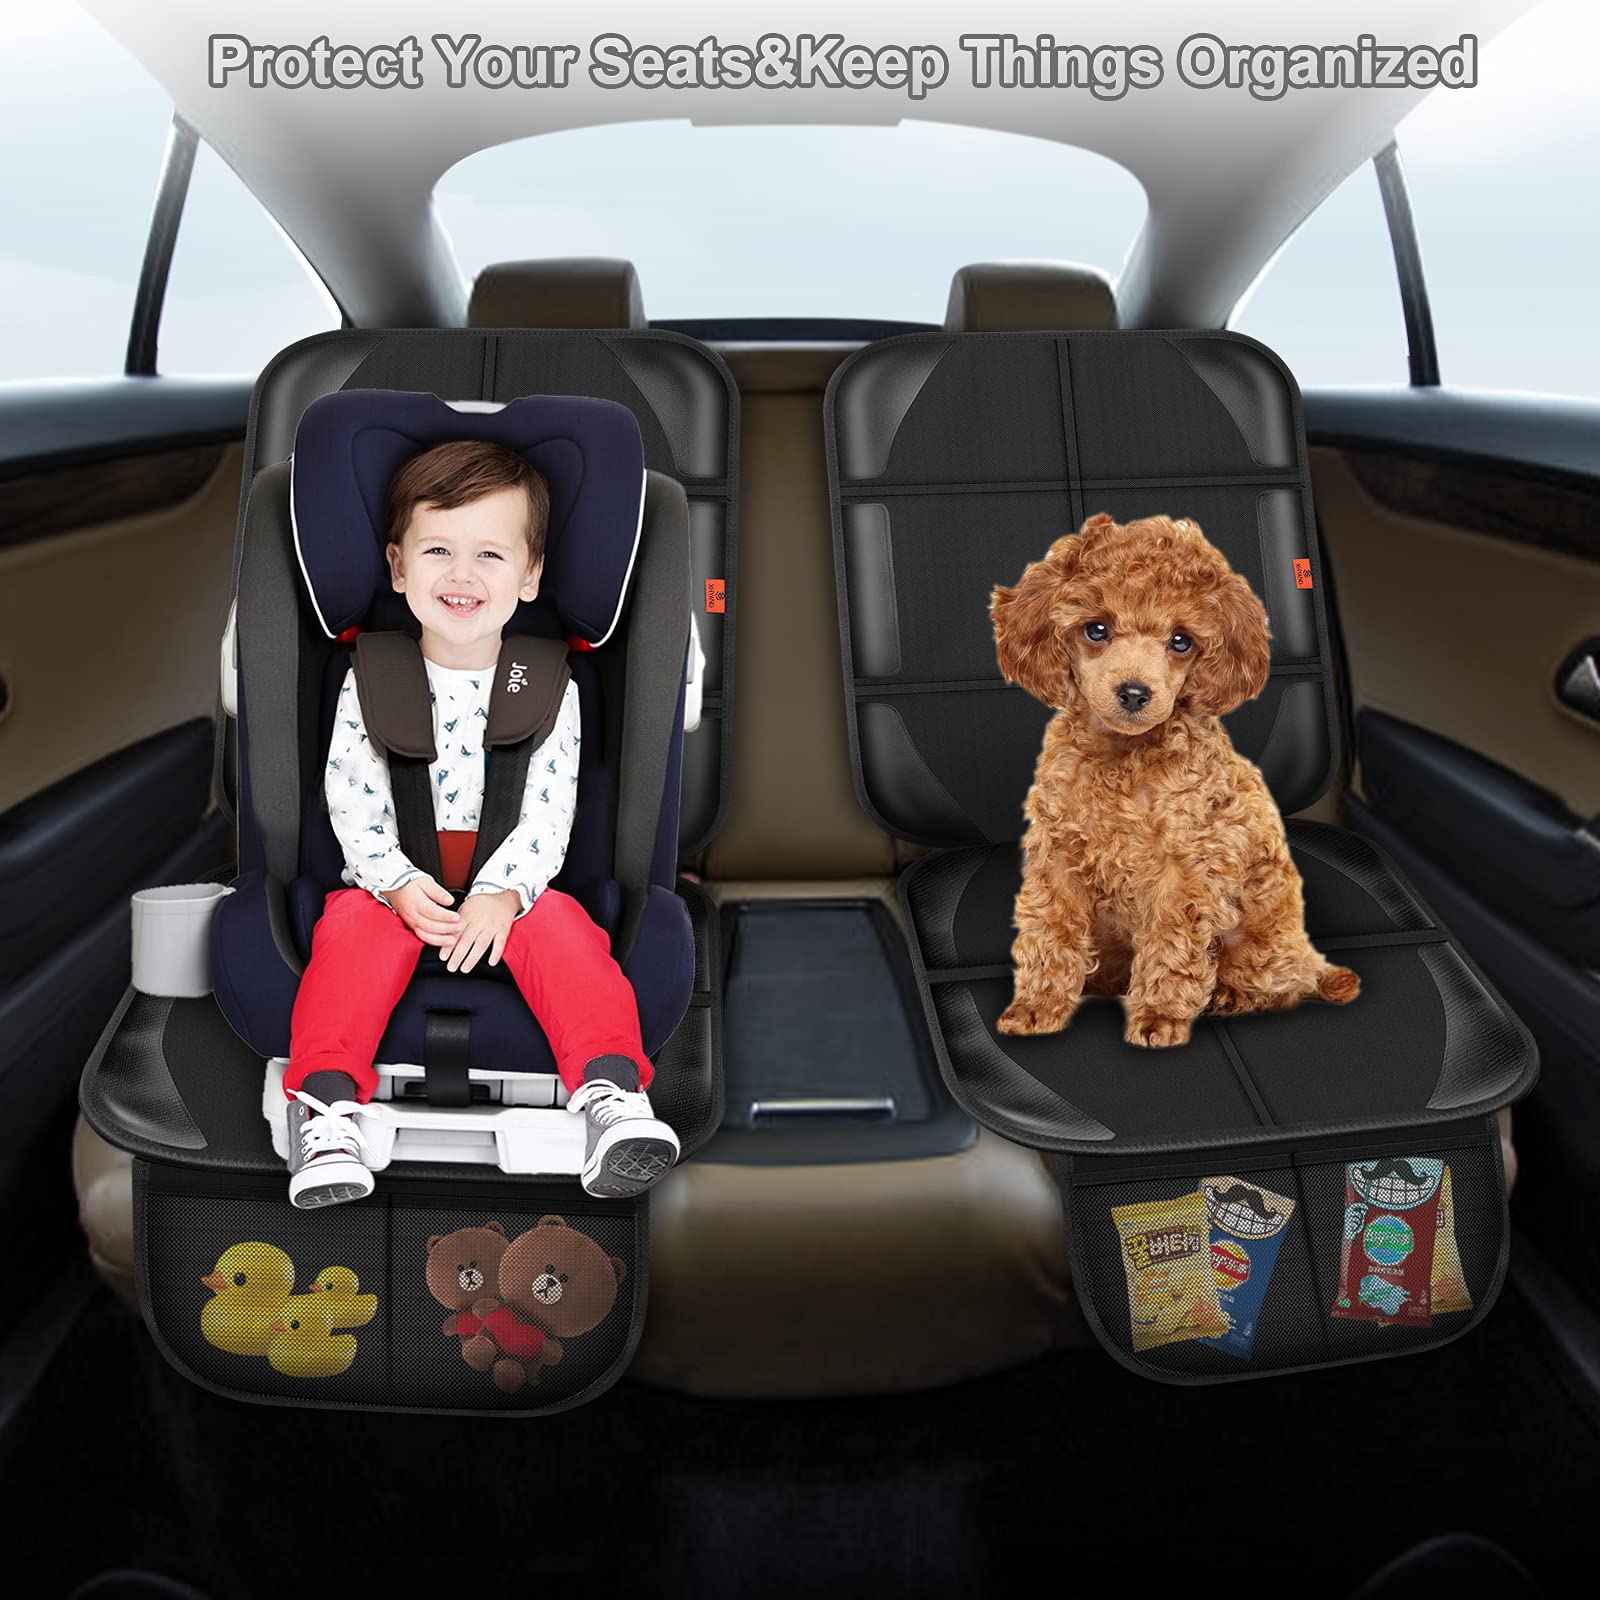 XHYANG Car Seat Protector,Auto Car Seat Protectors Baby Carseat Waterproof Durable 600D Fabric for Child Baby Car Seat Mat Vehicle Pet Cover 2 Storage Pockets (1 Pack)